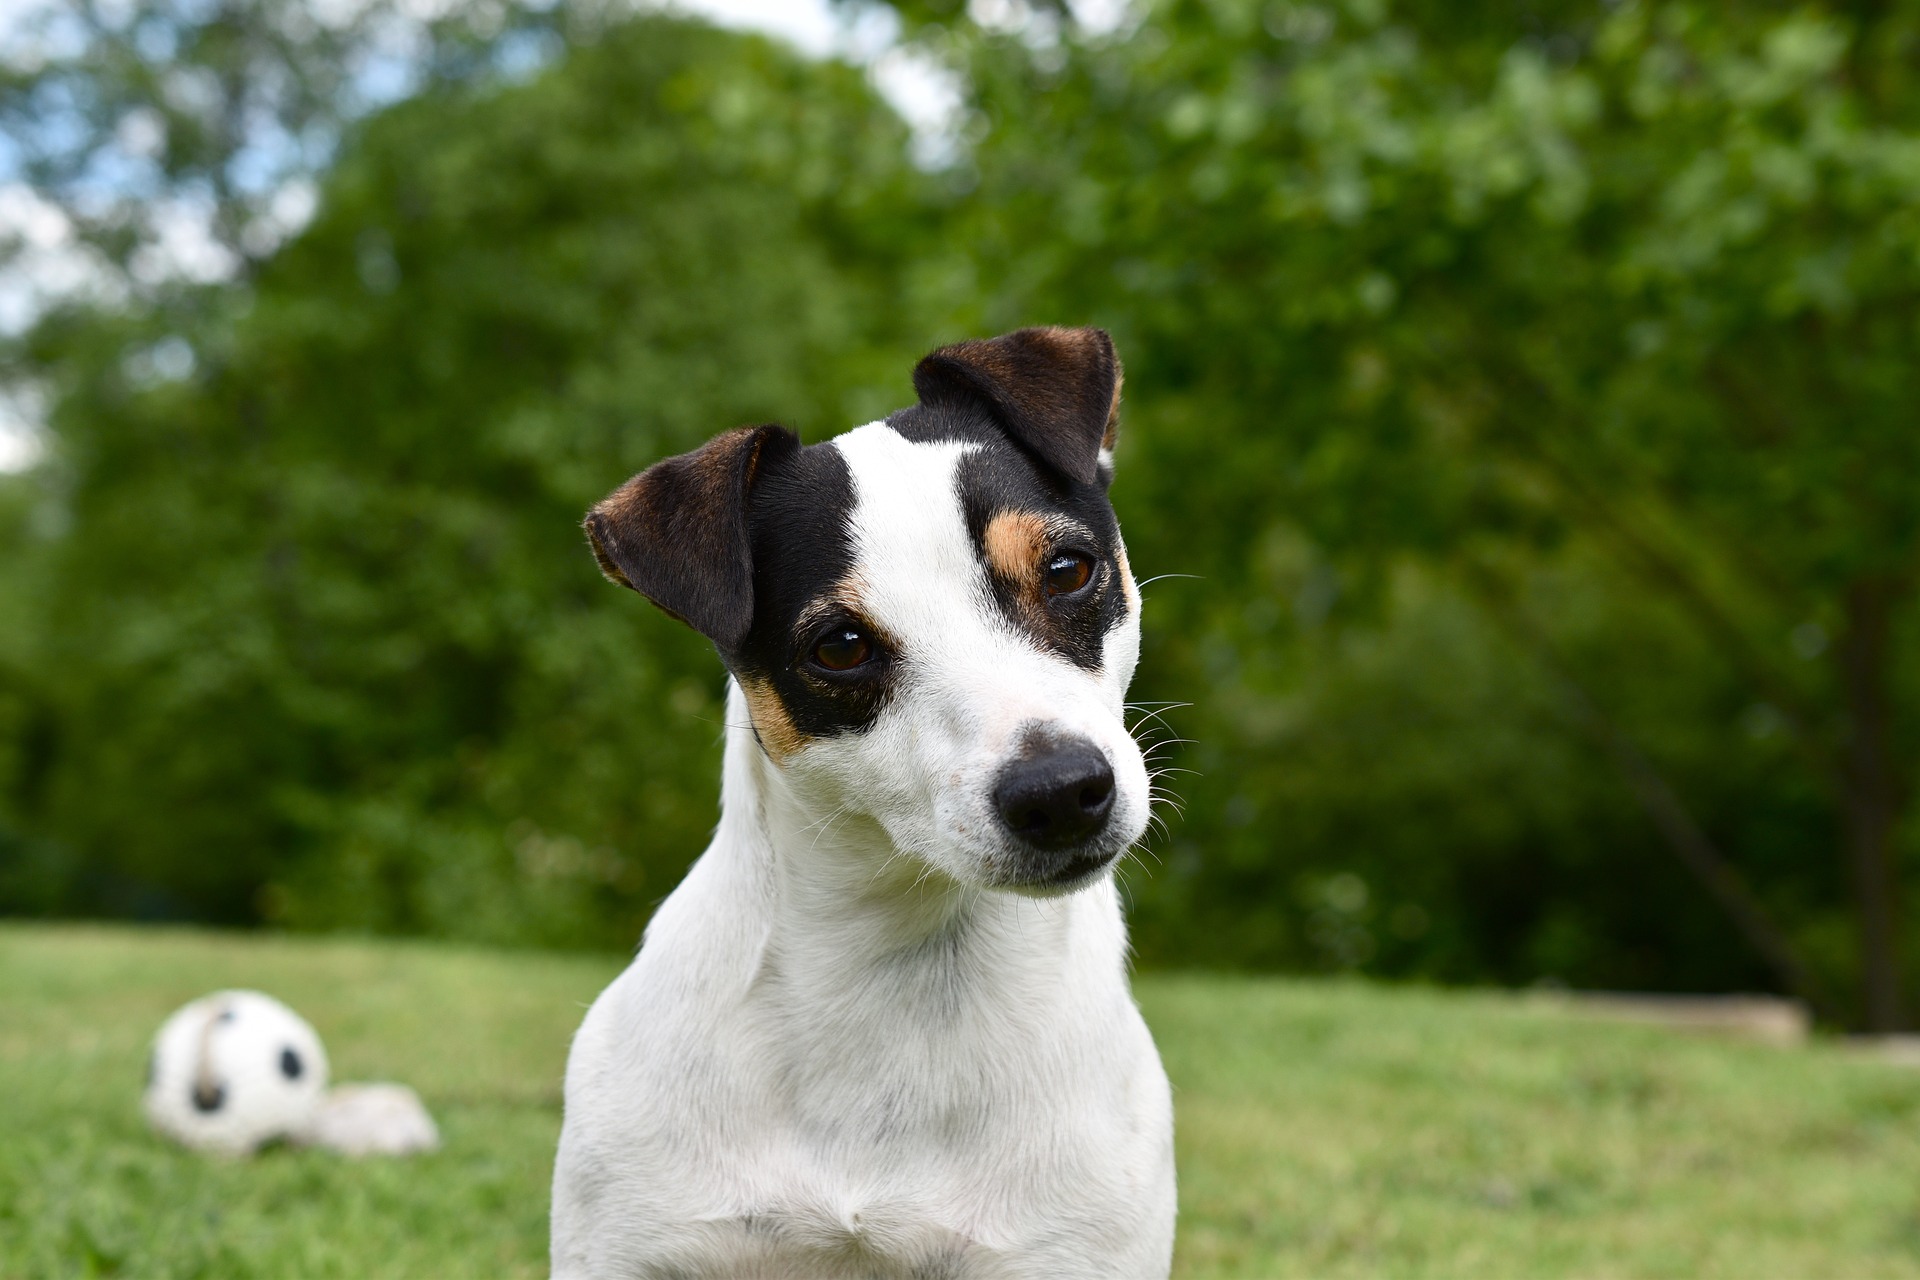 A curious Jack Russell Terrier